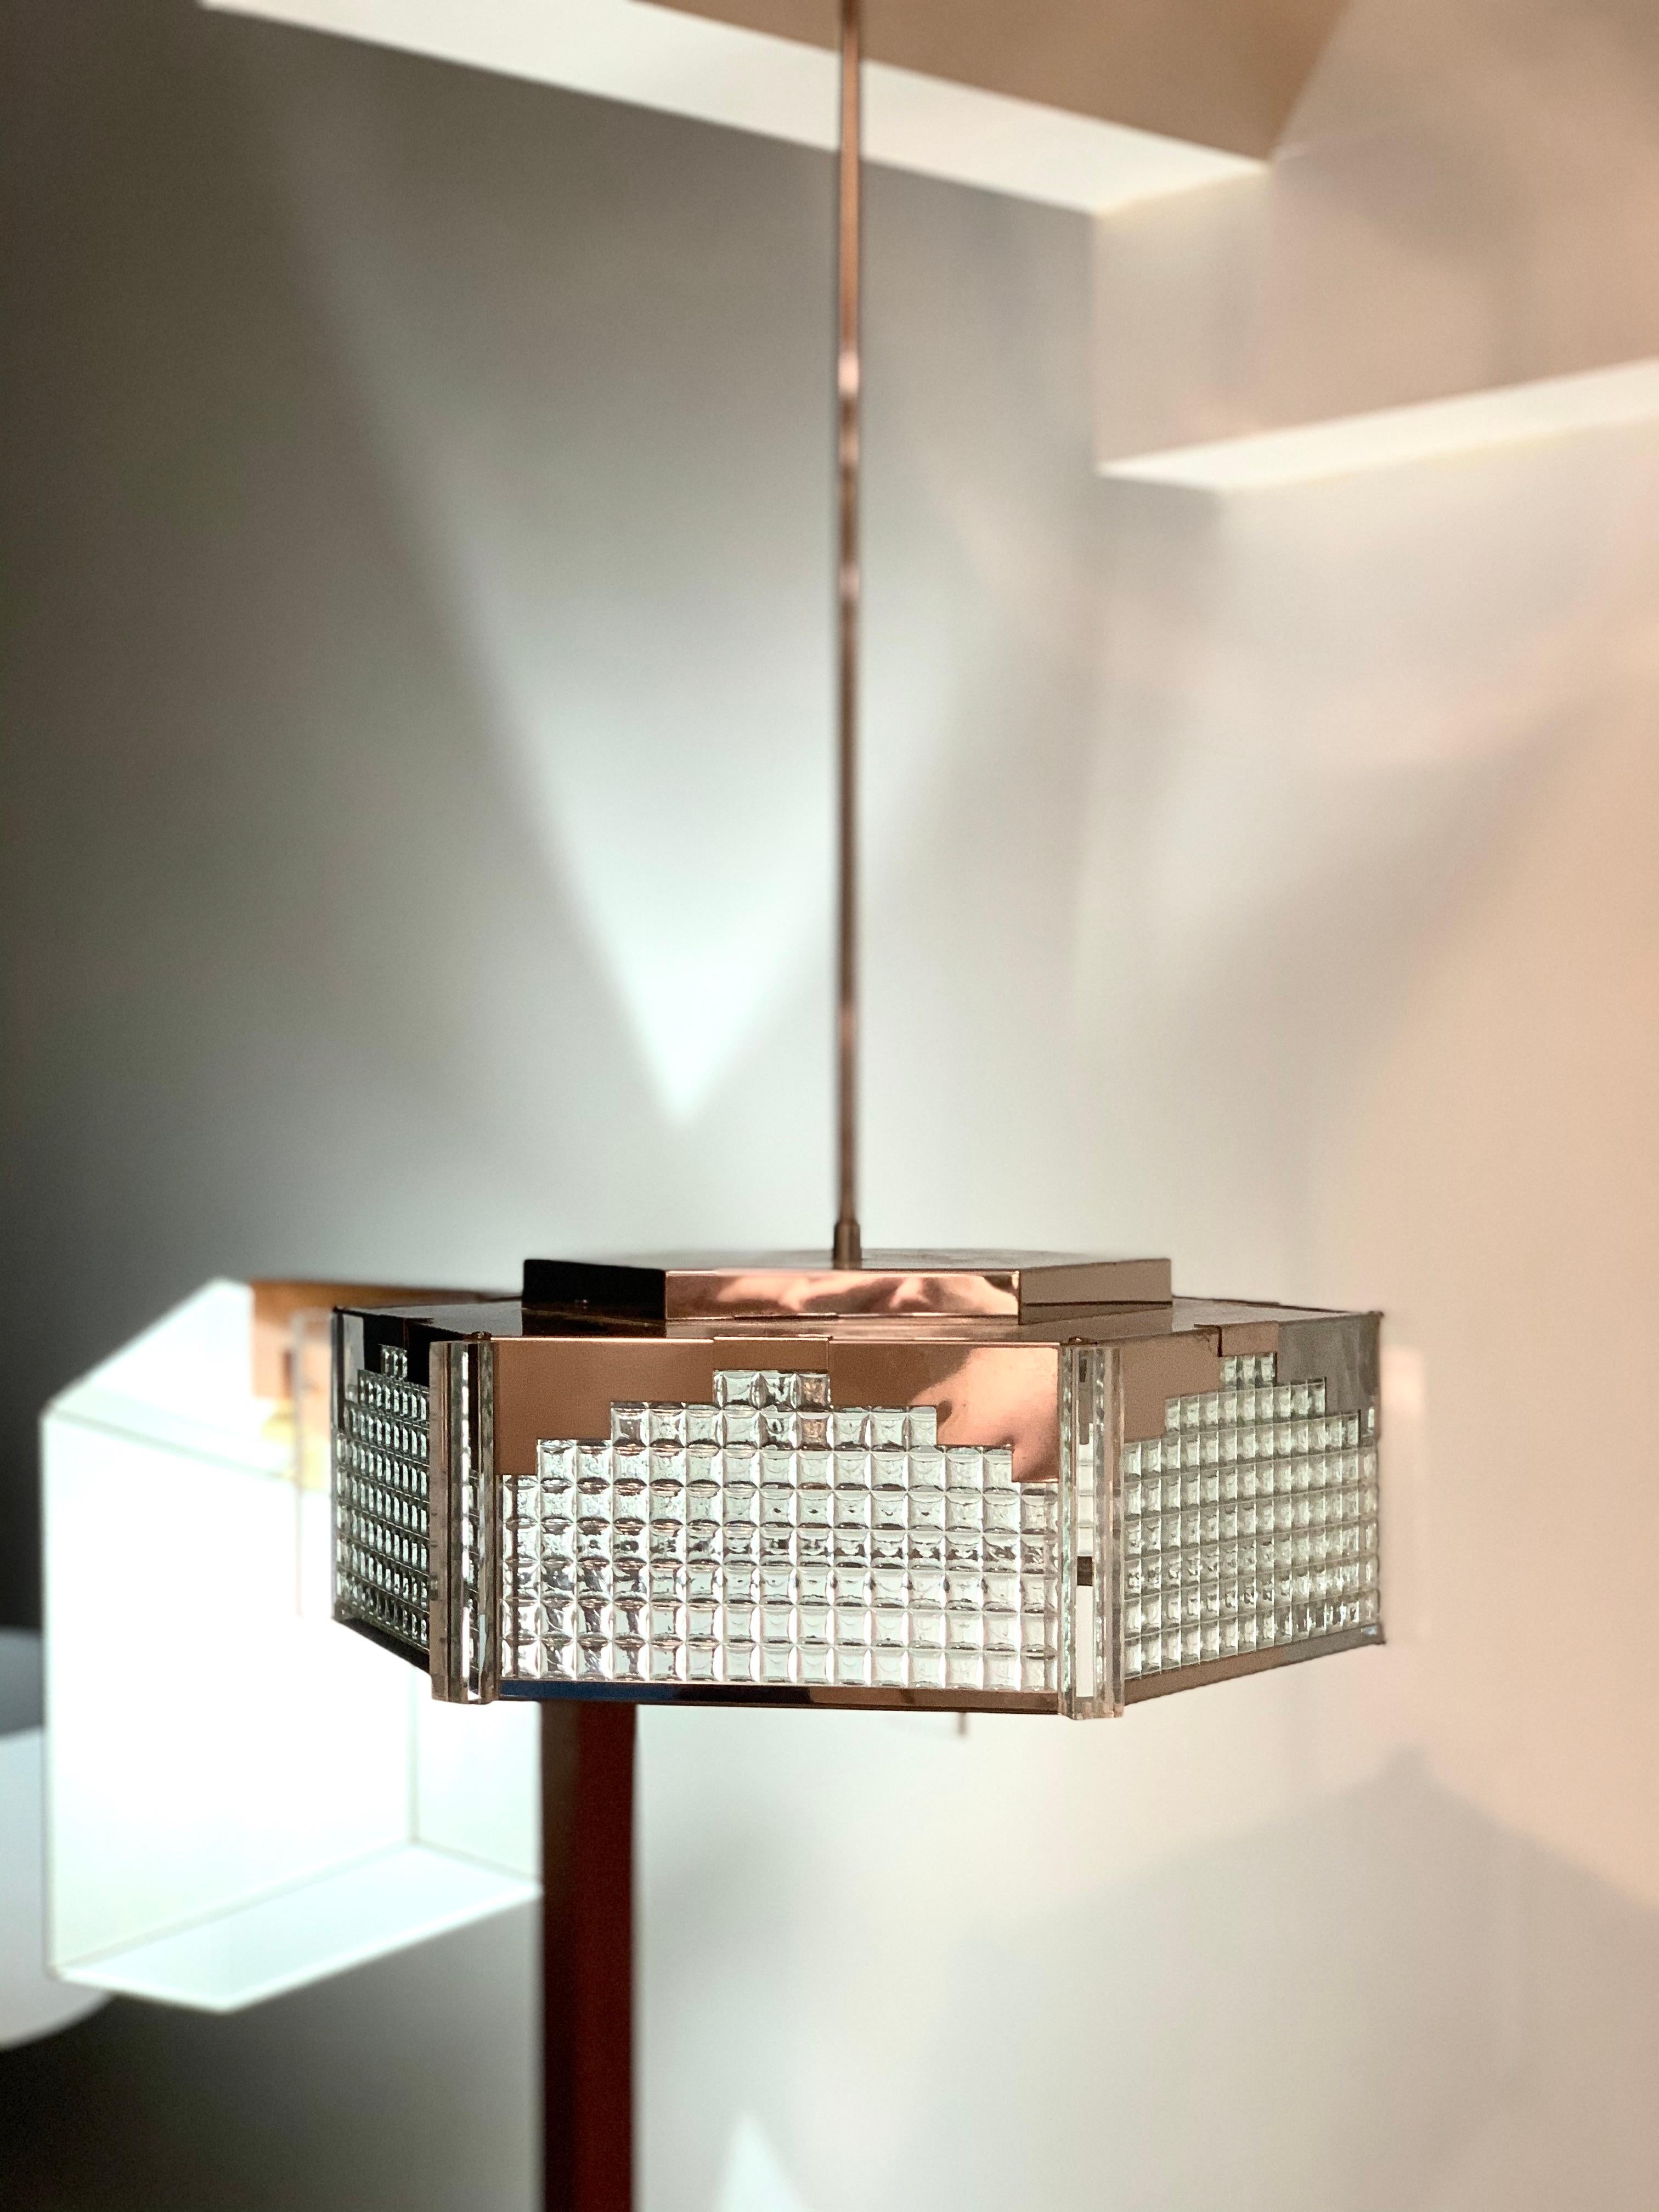 Chromed steel, art glass and Lucite Postmodern pendant fixtureby Fredrick Ramond. Neo-Deco, inspired by the streamline moderne stylings of the 1930s, this Postmodern design incorporates panels of stacked, block glass, a stepped chrome steel frame